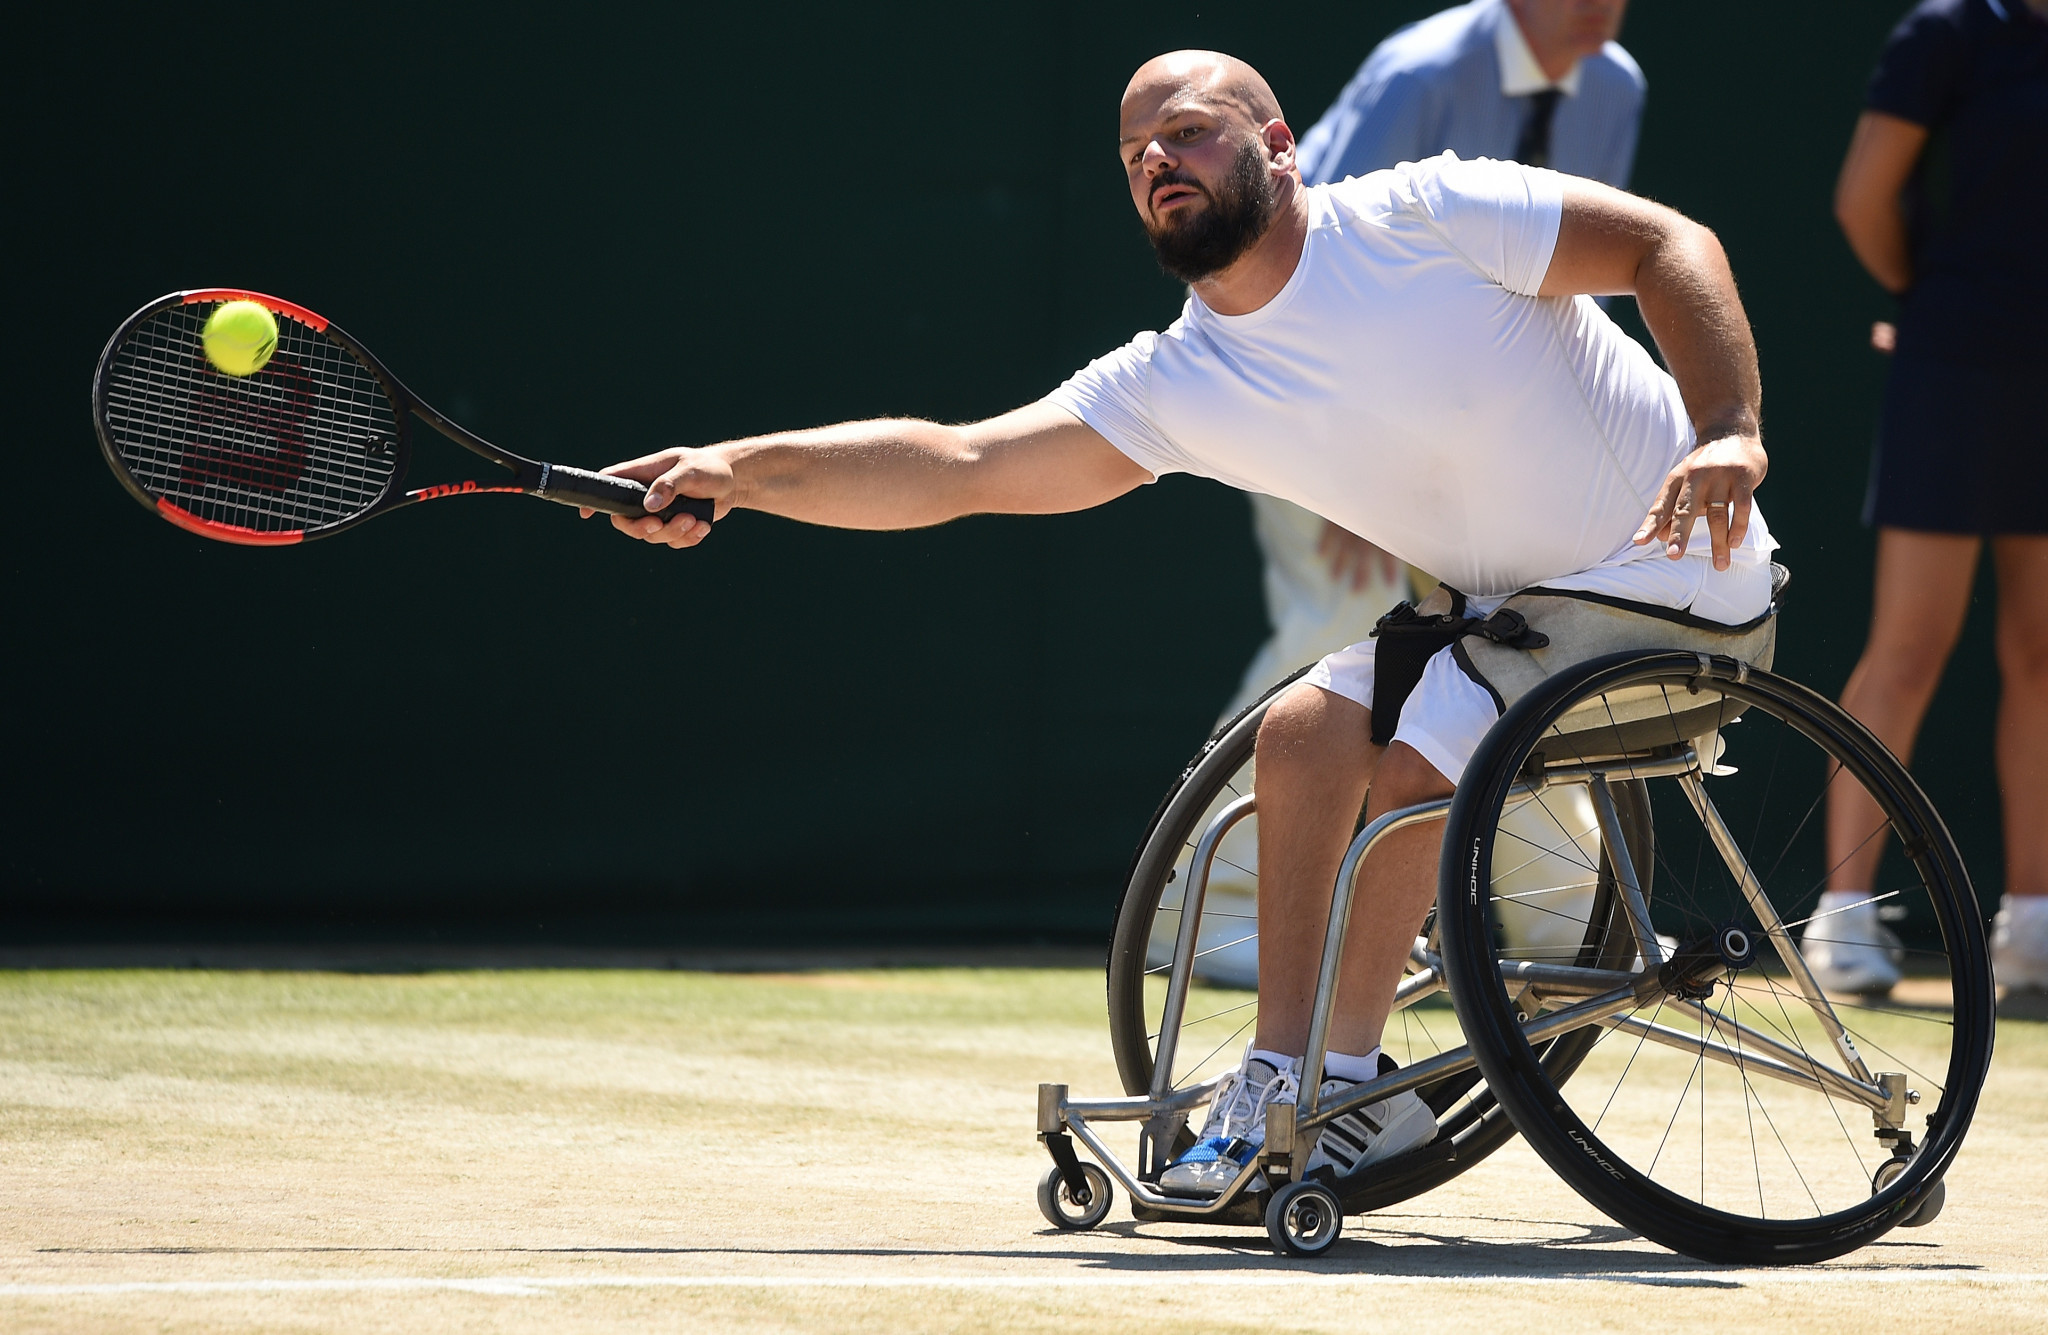 Olsson repeats history as he defends Wimbledon men's wheelchair singles title against Fernández